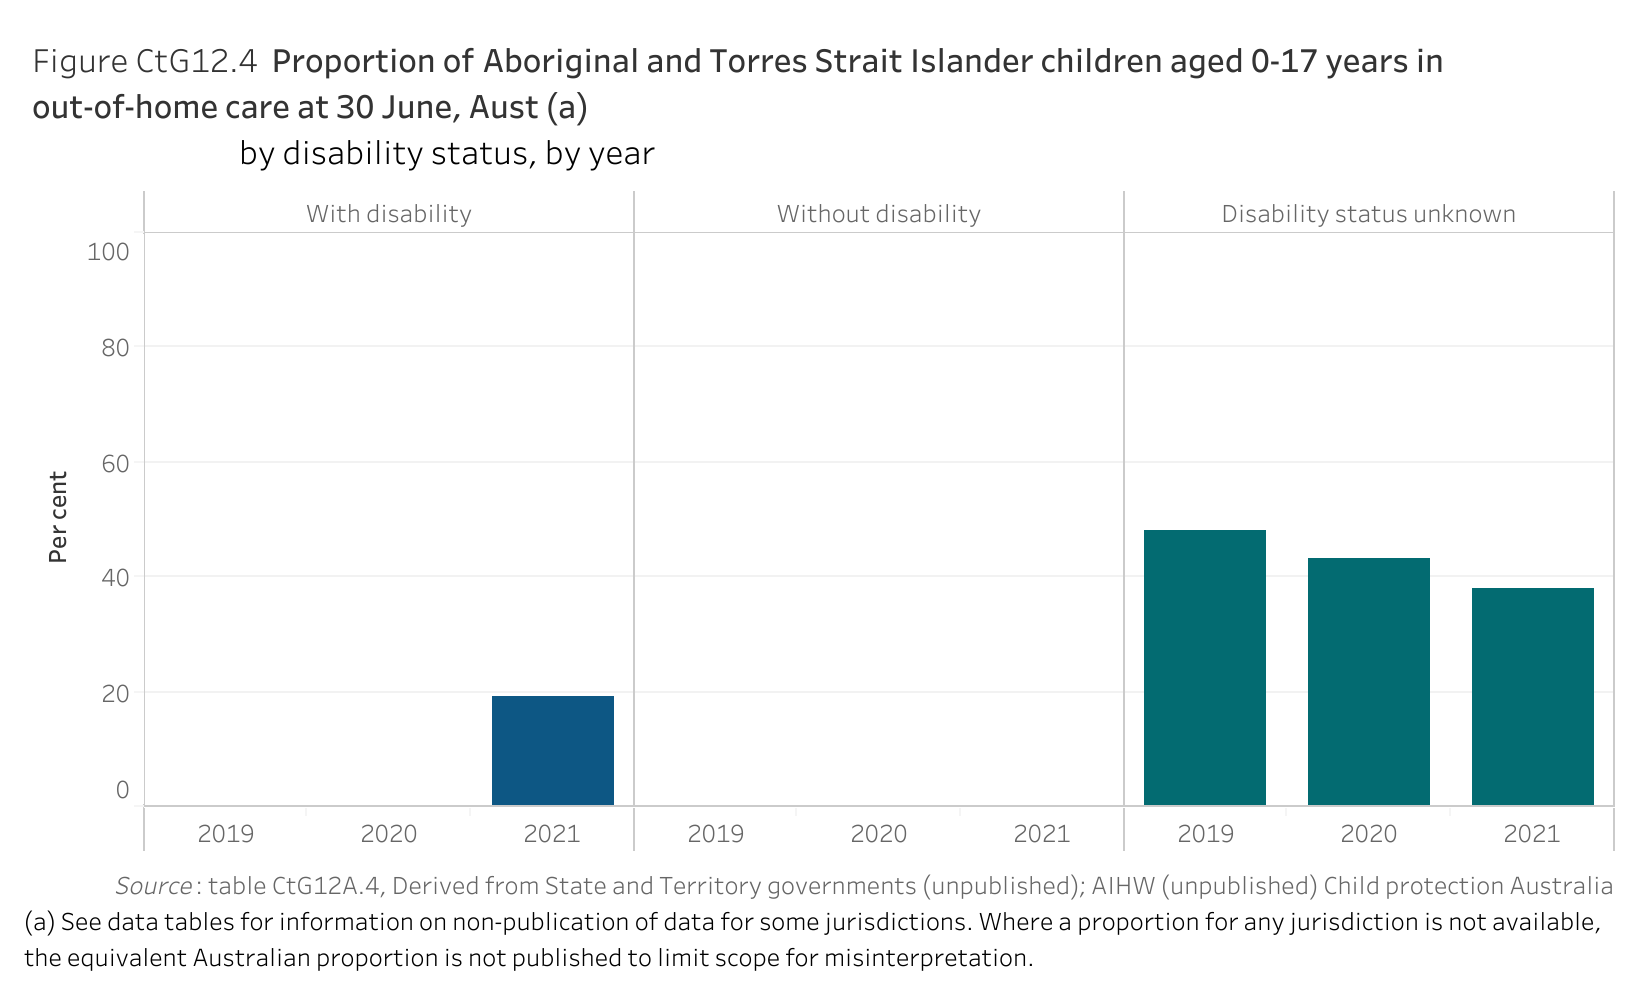 Figure CtG12.4. Bar chart showing the proportion of Aboriginal and Torres Strait Islander children aged 0-17 years in out-of-home care at 30 June in Australia, by disability status and by year. Data table of figure CtG12.4 is below.